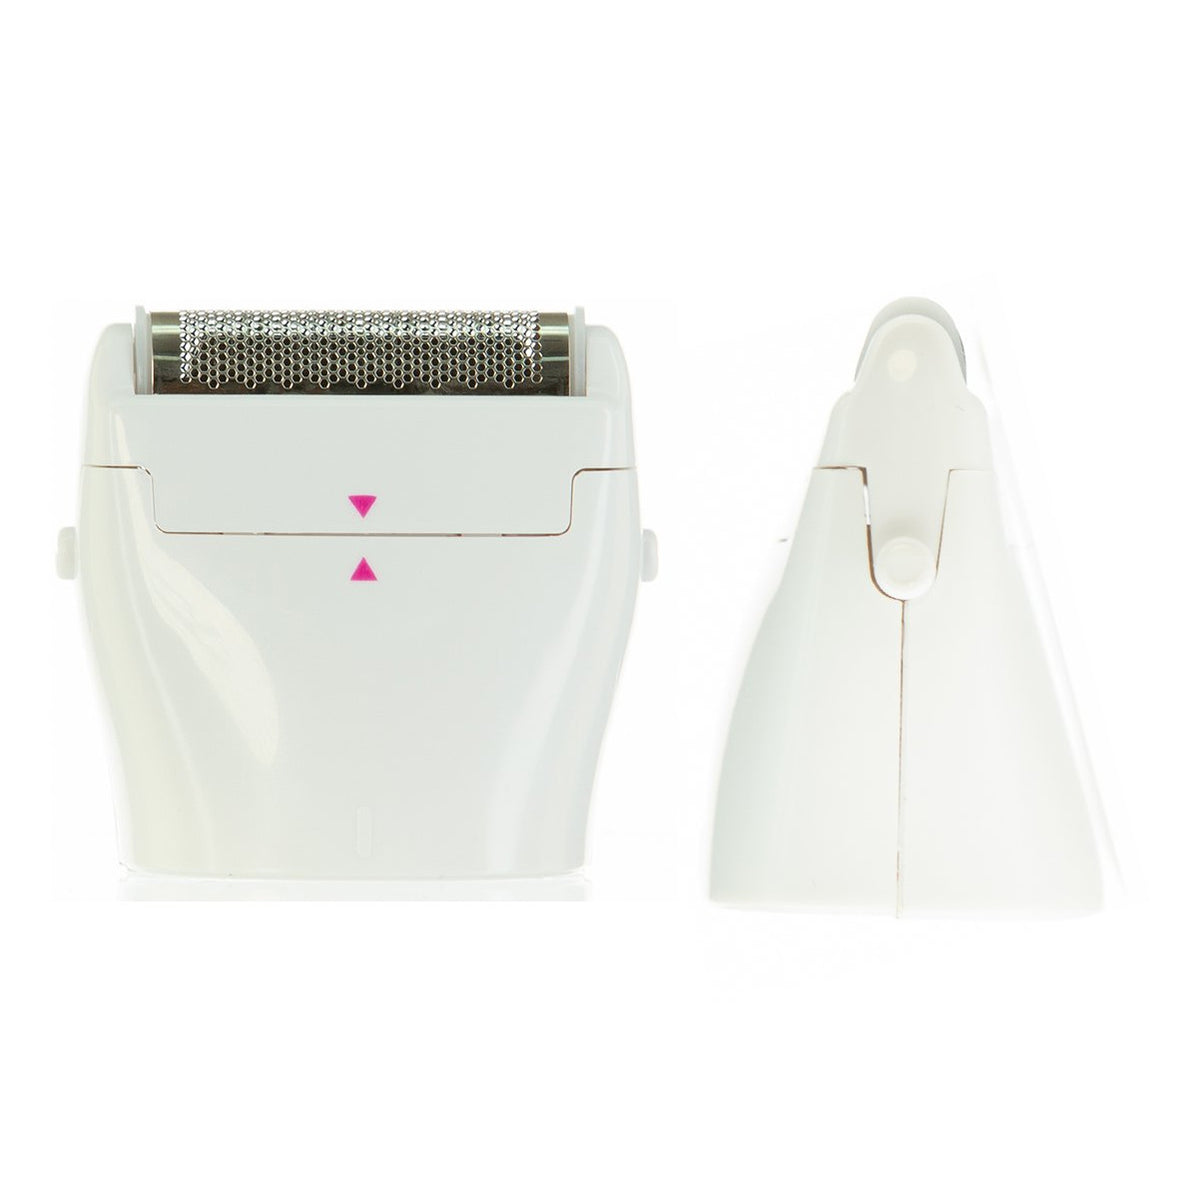 Ultimate Personal Shaver - Women